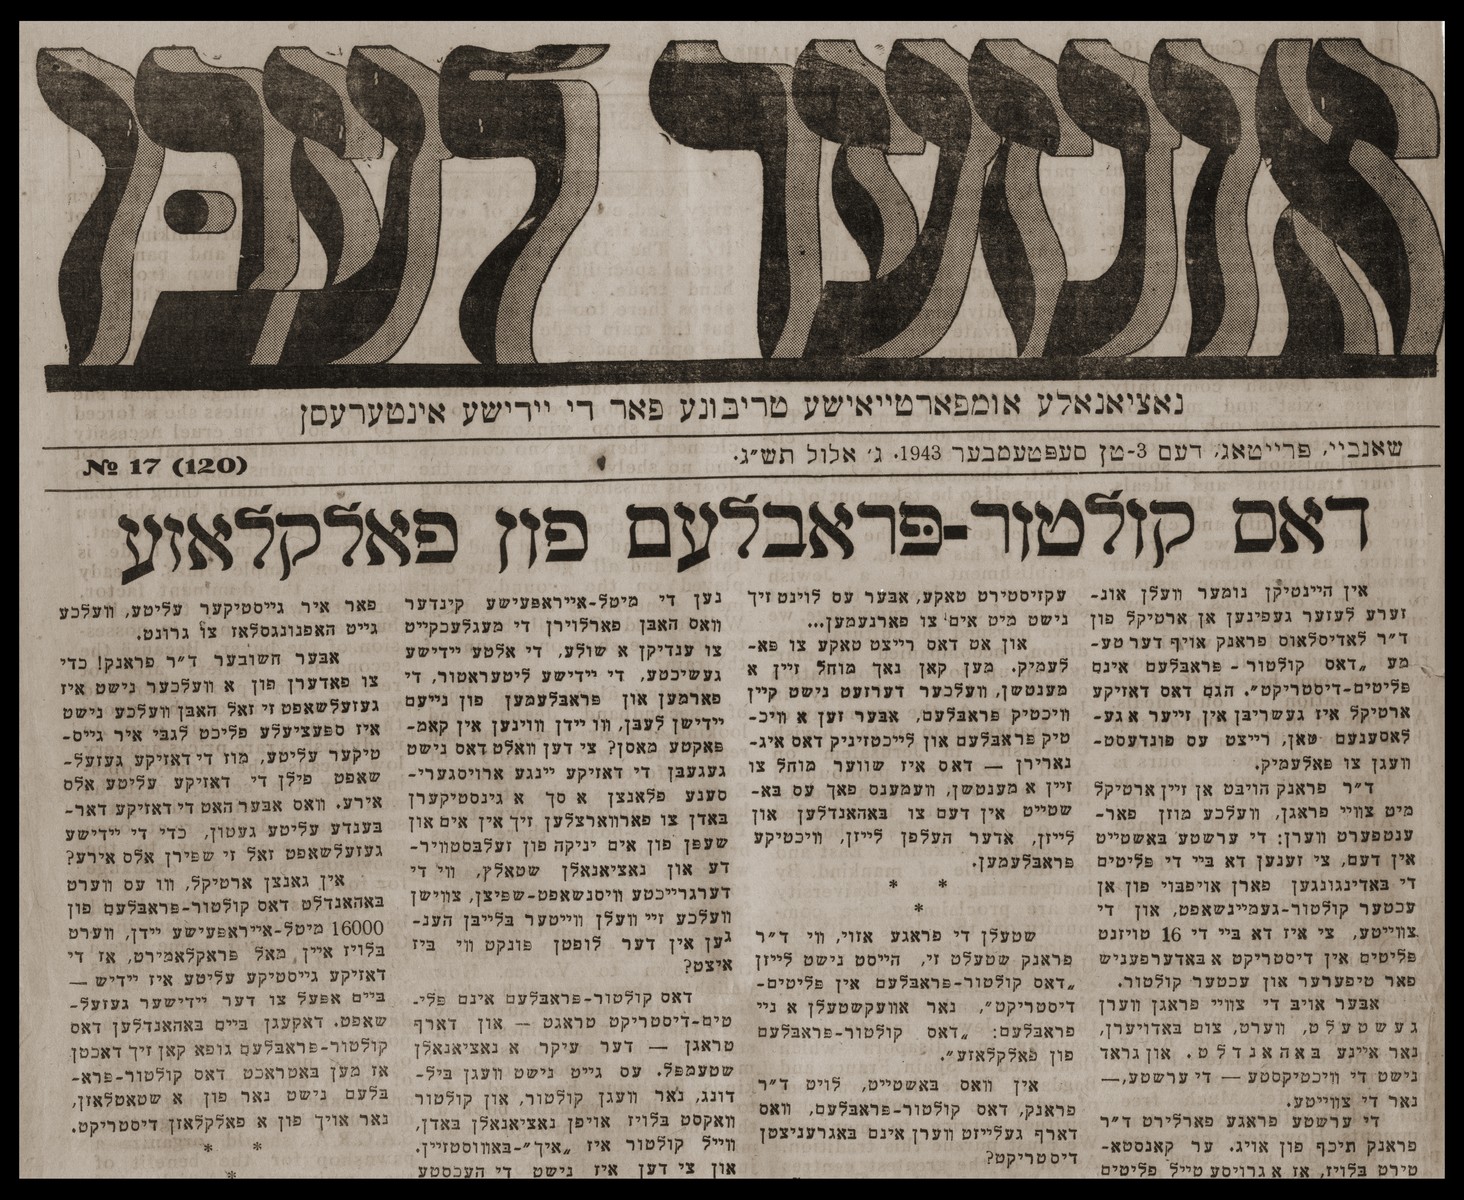 The cover of the Yiddish language newspaper "Our Life", the National Tribune of Jewish Interests.  The headline reads "The Culture Problem Among the Stateless".